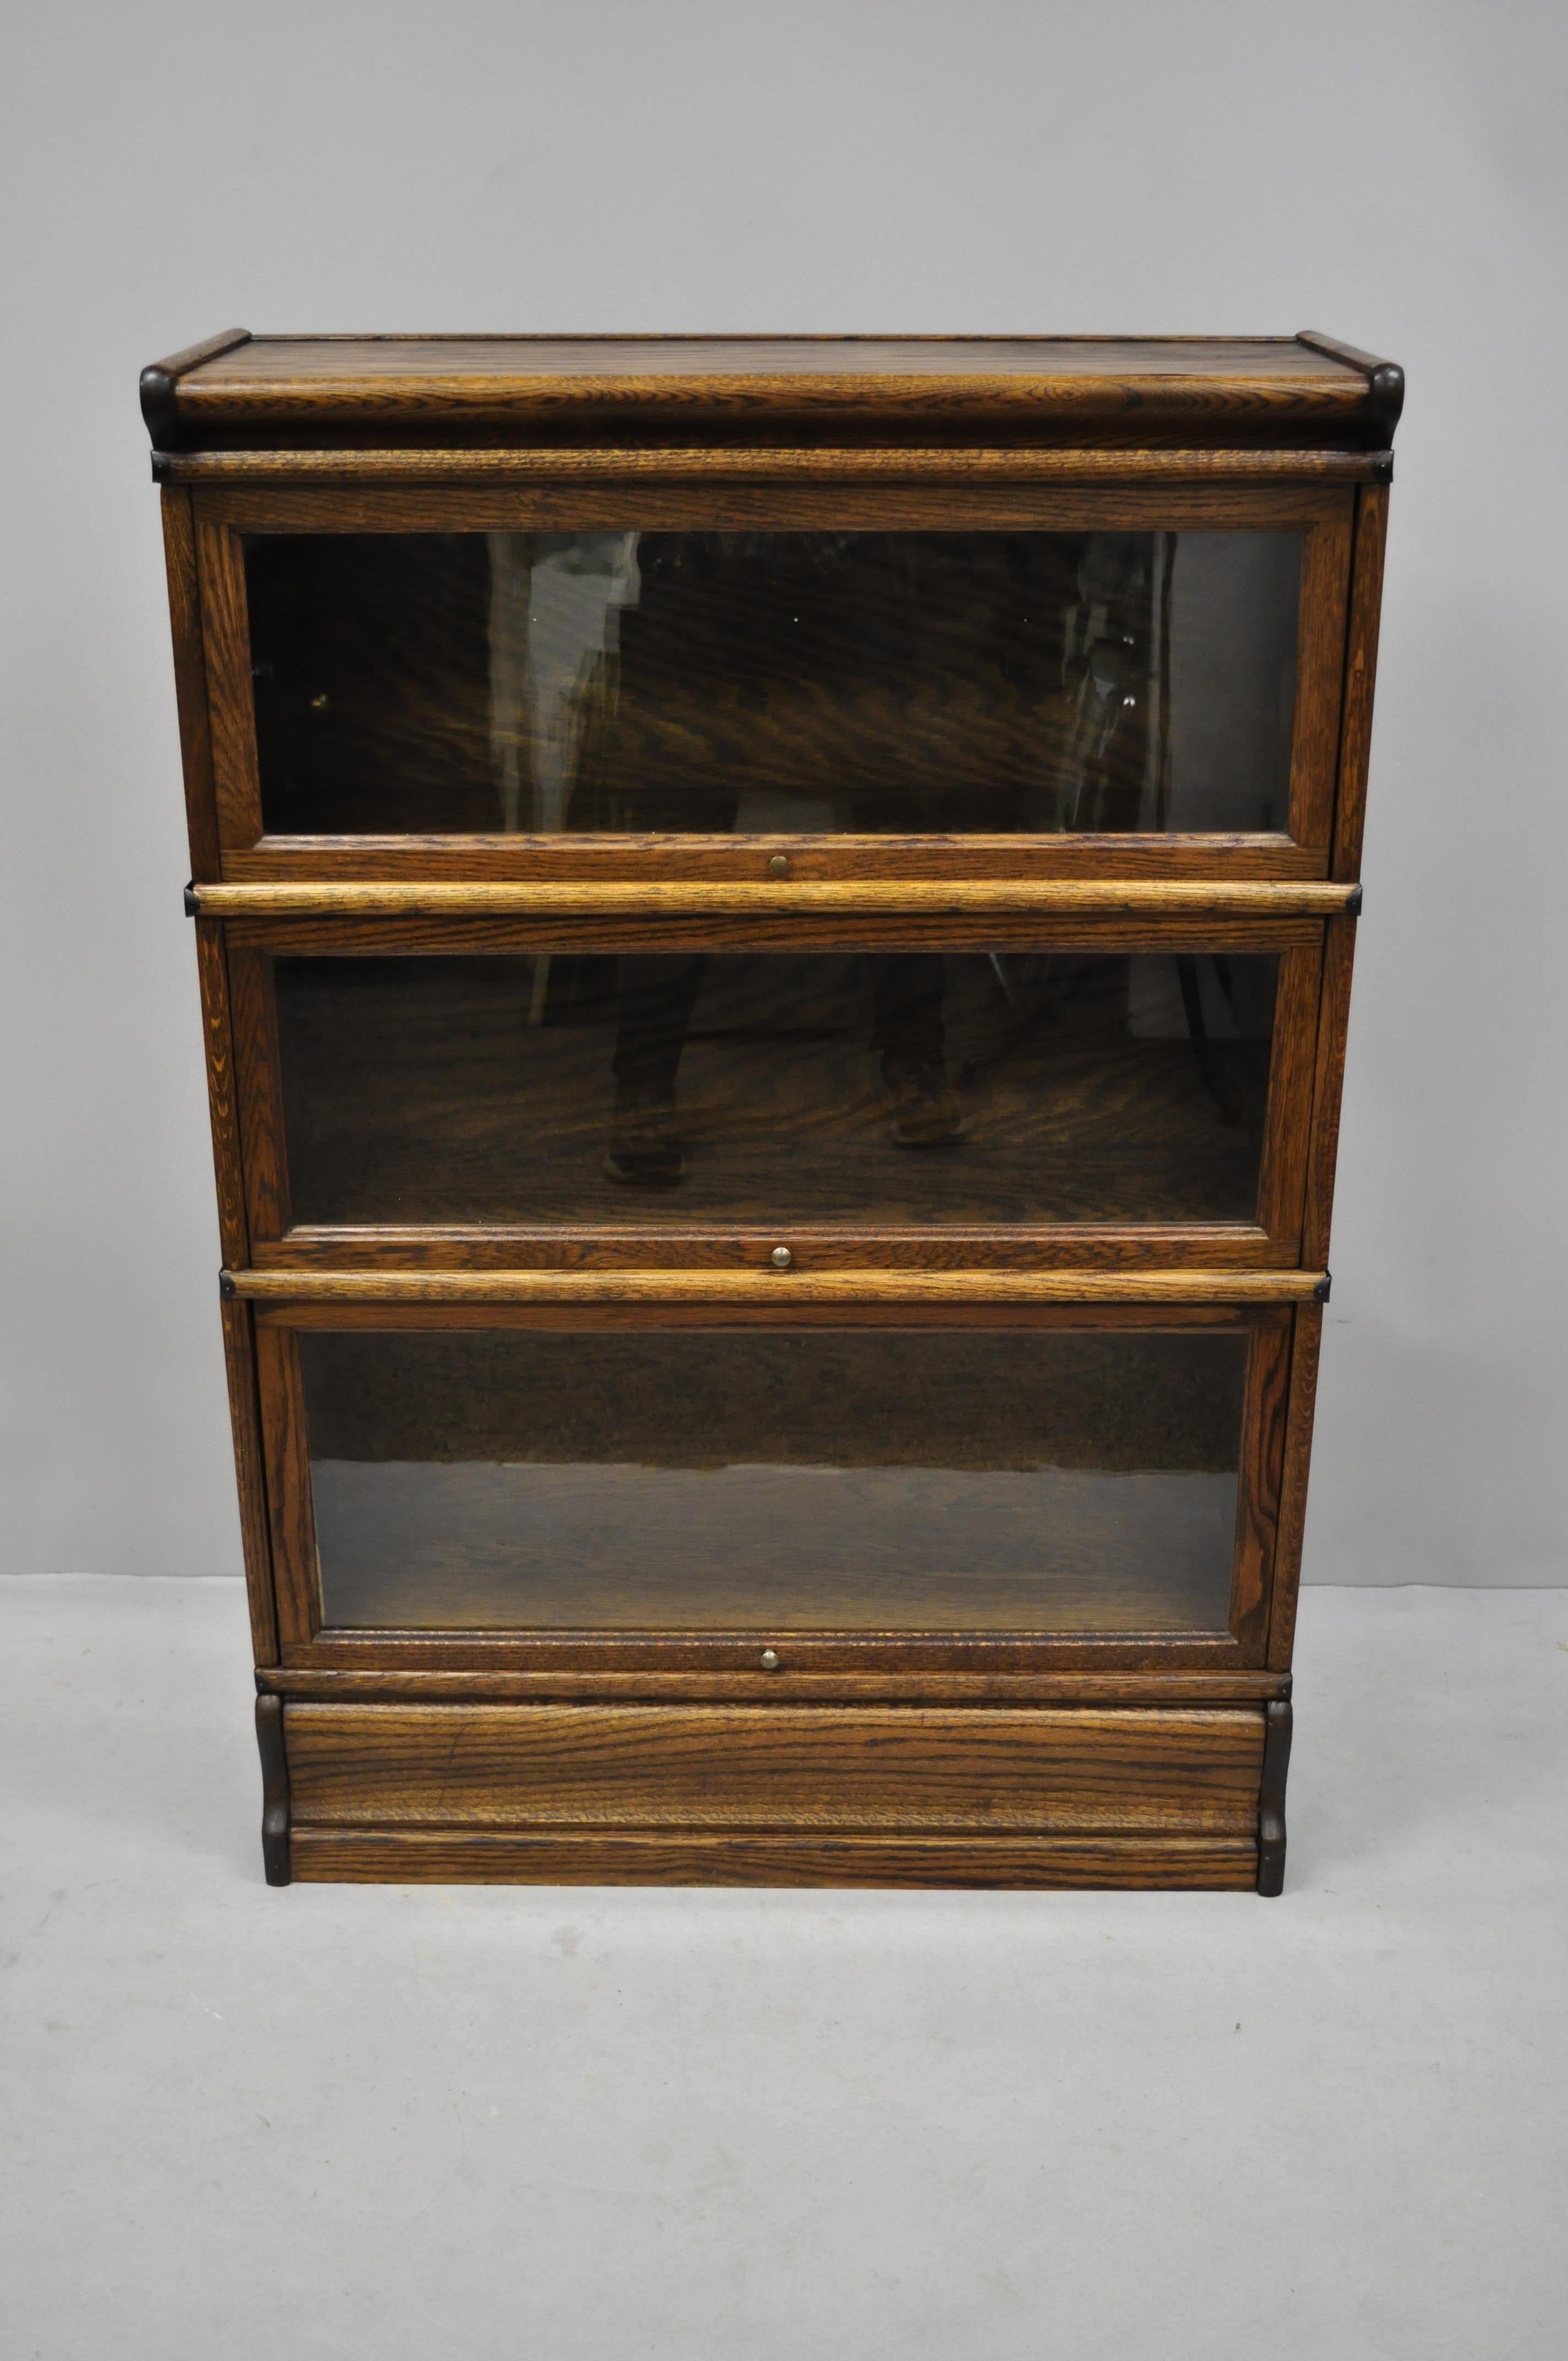 Antique Macey oak 3 section stacking lawyers Barrister bookcase. Item features 3 bookcase sections, glass doors, metal bands, beautiful wood grain, 5 part construction, circa early to mid-20th century. Measurements: 49